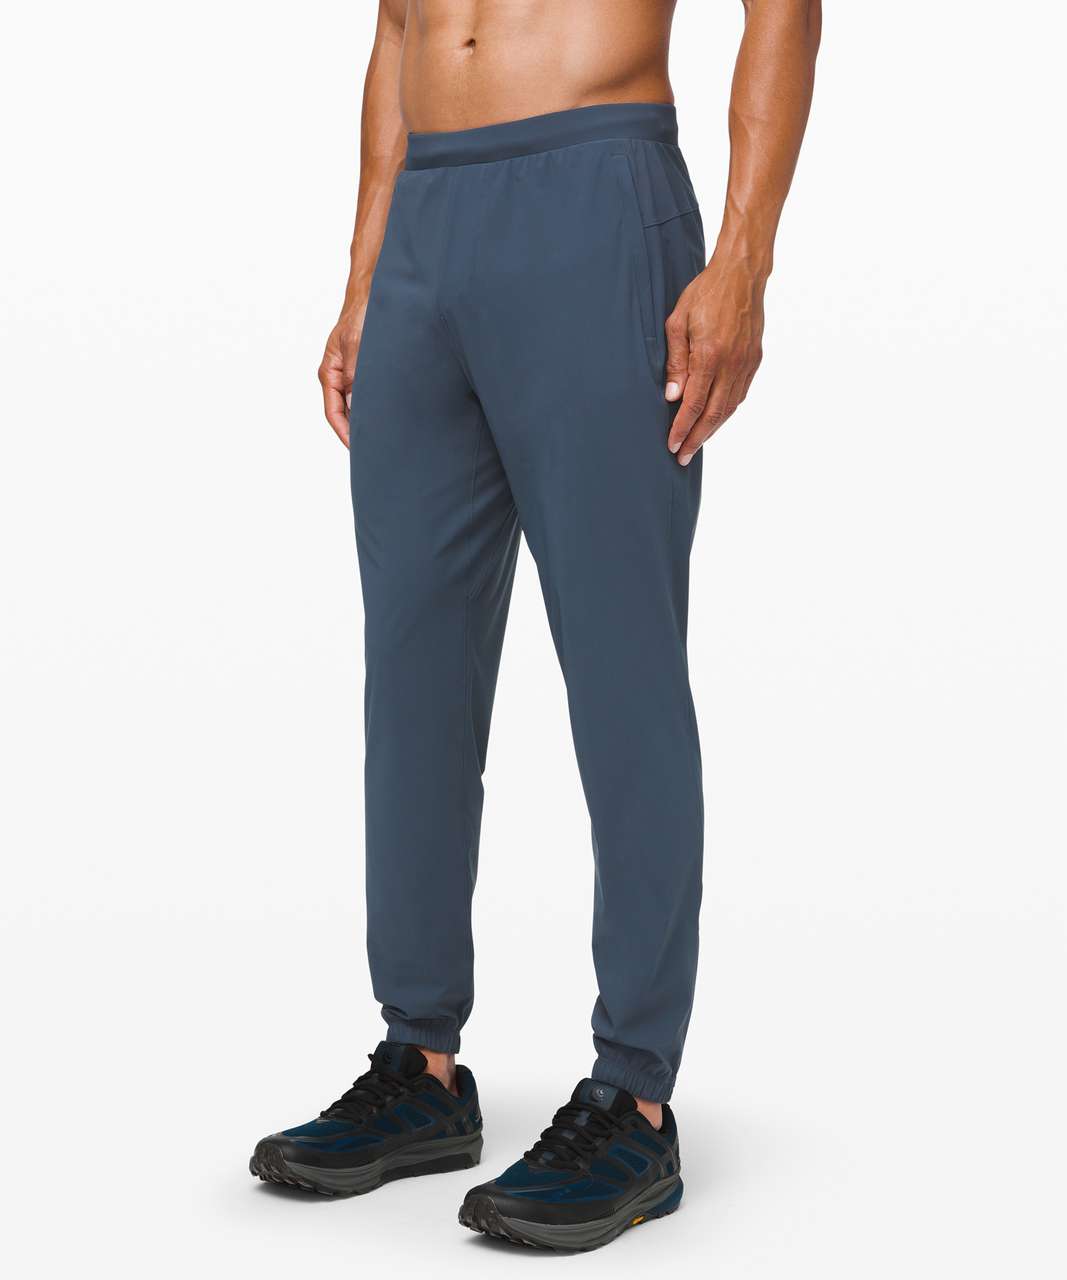 The Surge Joggers walk so we could run. #lululemon #surgejoggers